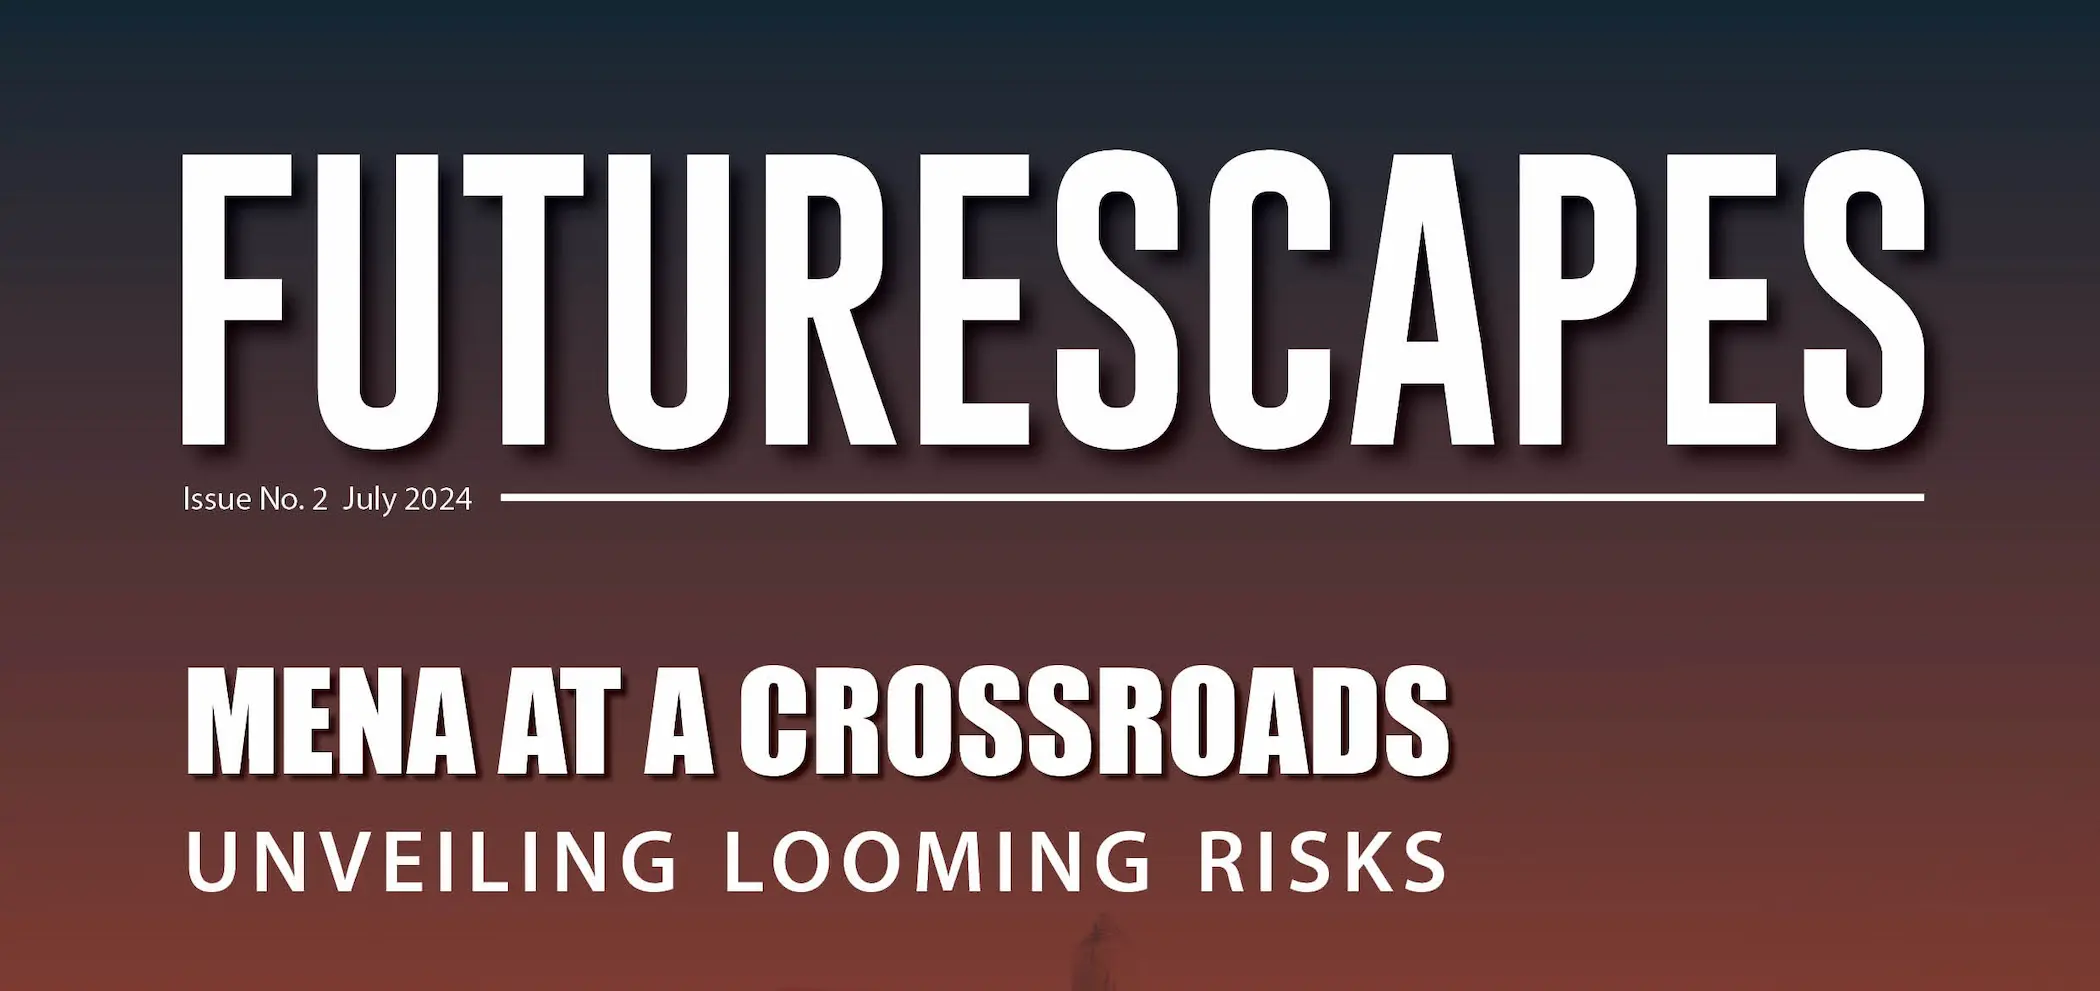 Futurescapes Issue 2 – MENA at a Crossroads: Unveiling Looming Risks